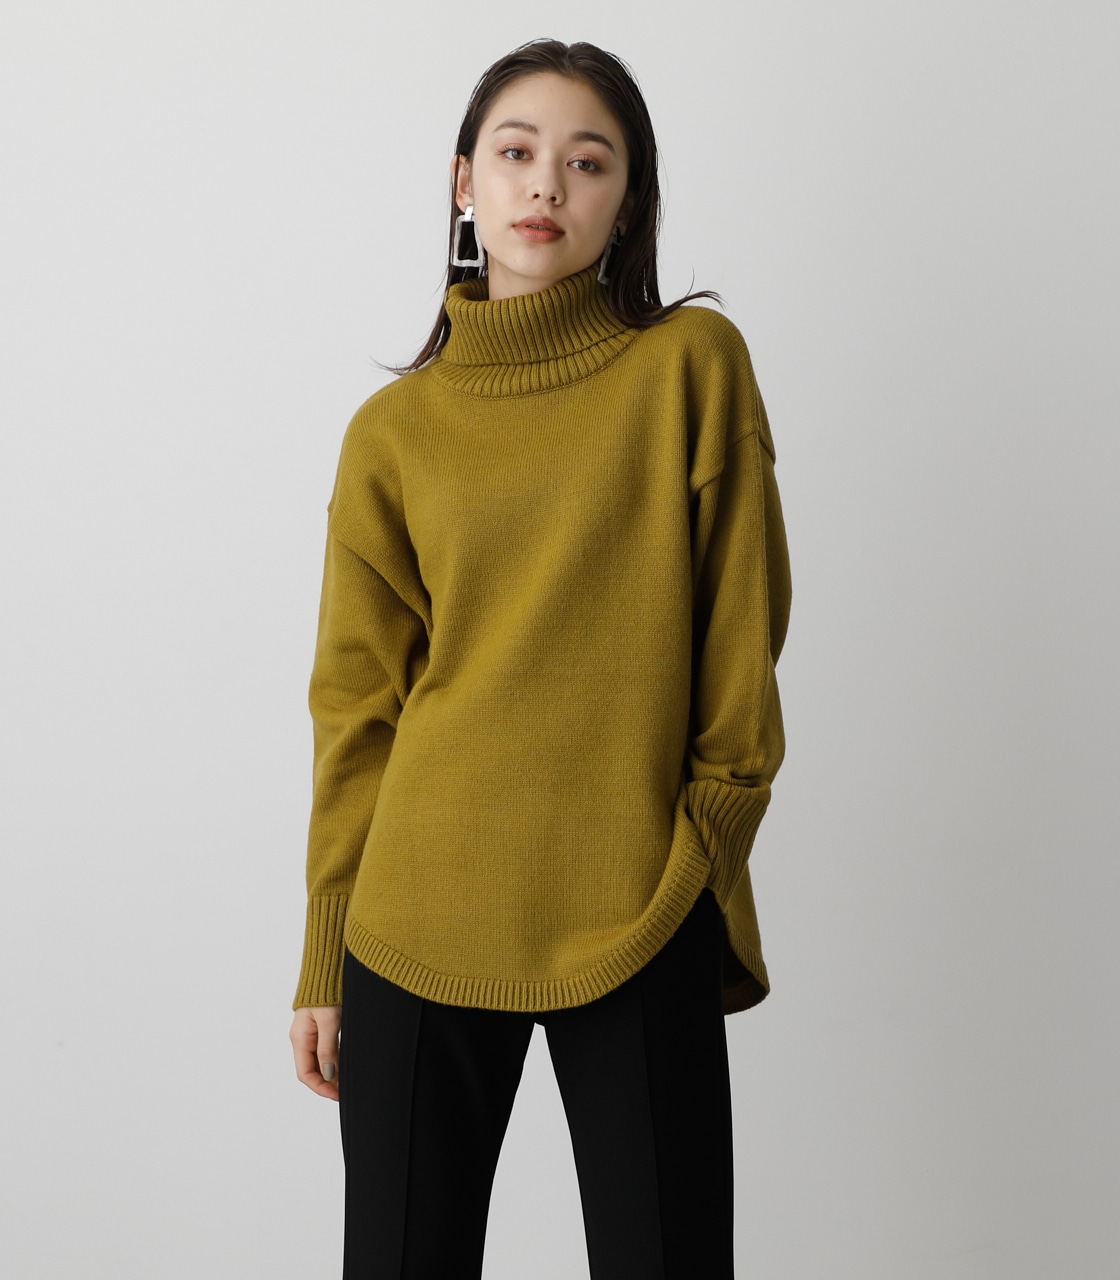 BIG TURTLE KNIT TOPS/ビッグタートルニットトップス 詳細画像 LIME 1